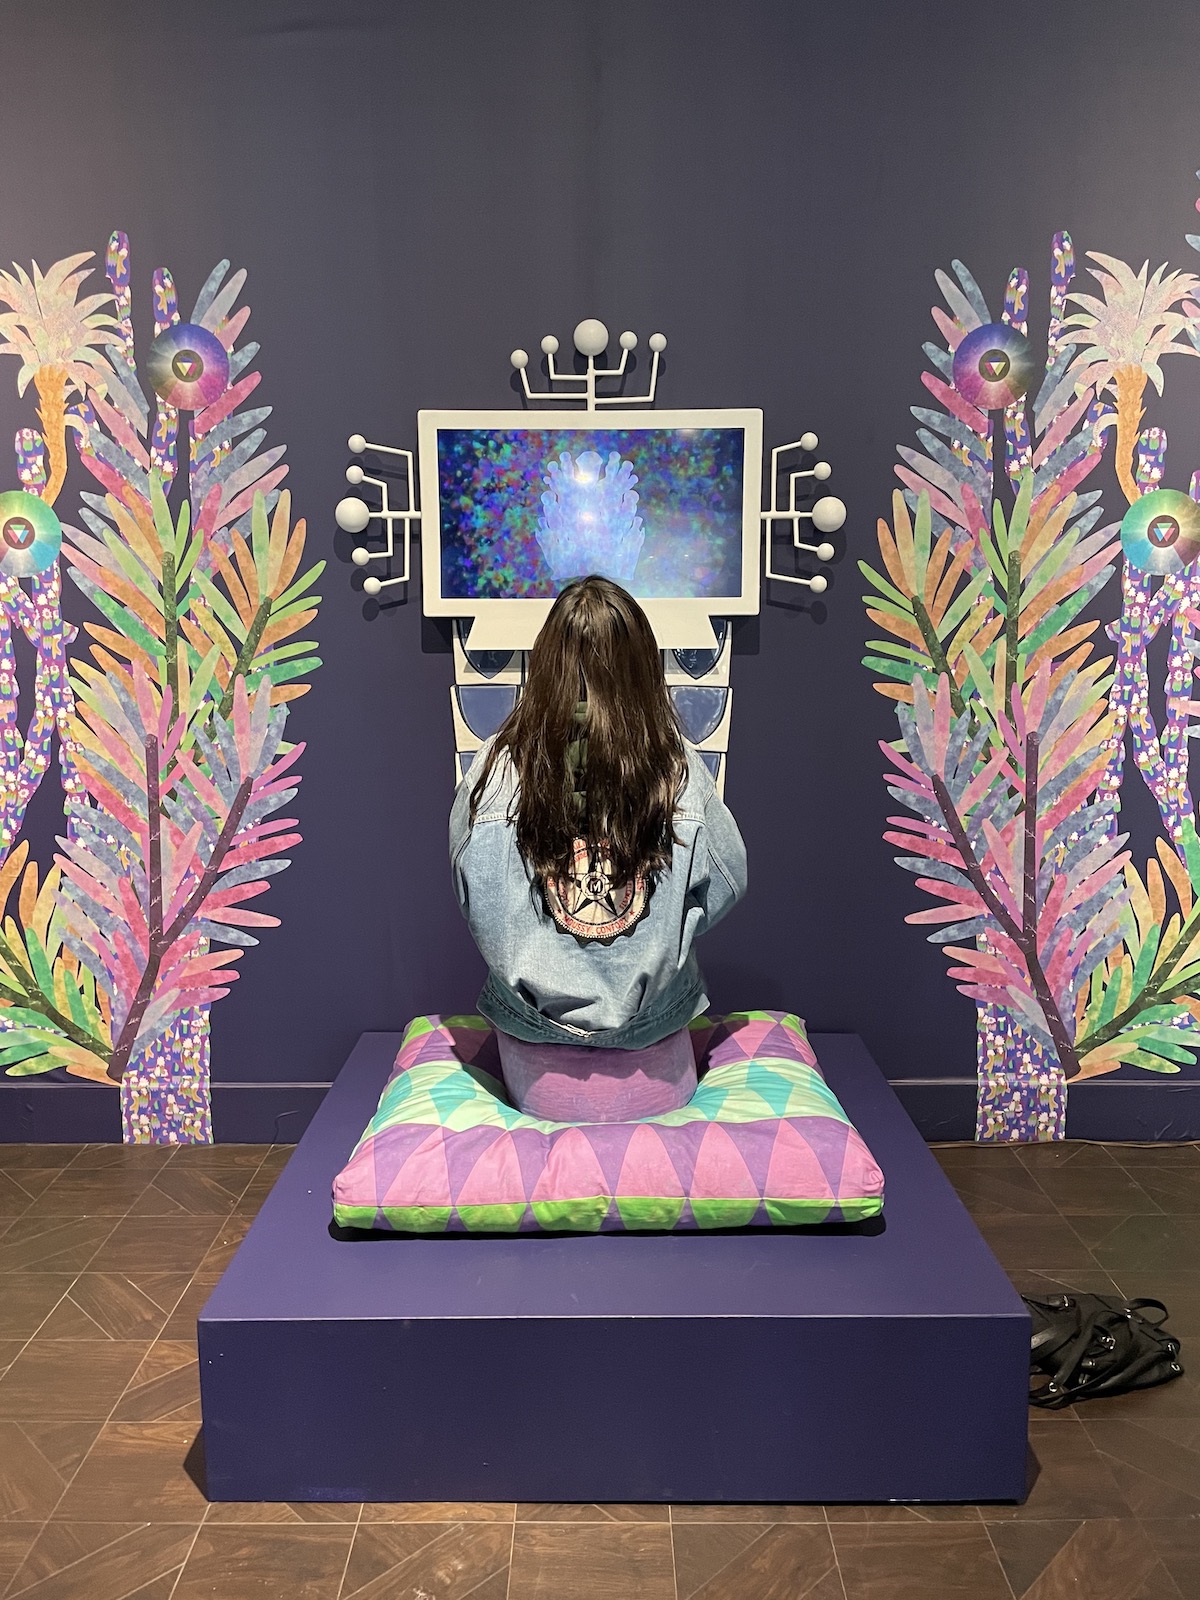 Woman sits on a cushion in front of a video screen flanked on both sides by and art installation of fantastical trees with yellow. pink, purple leaves